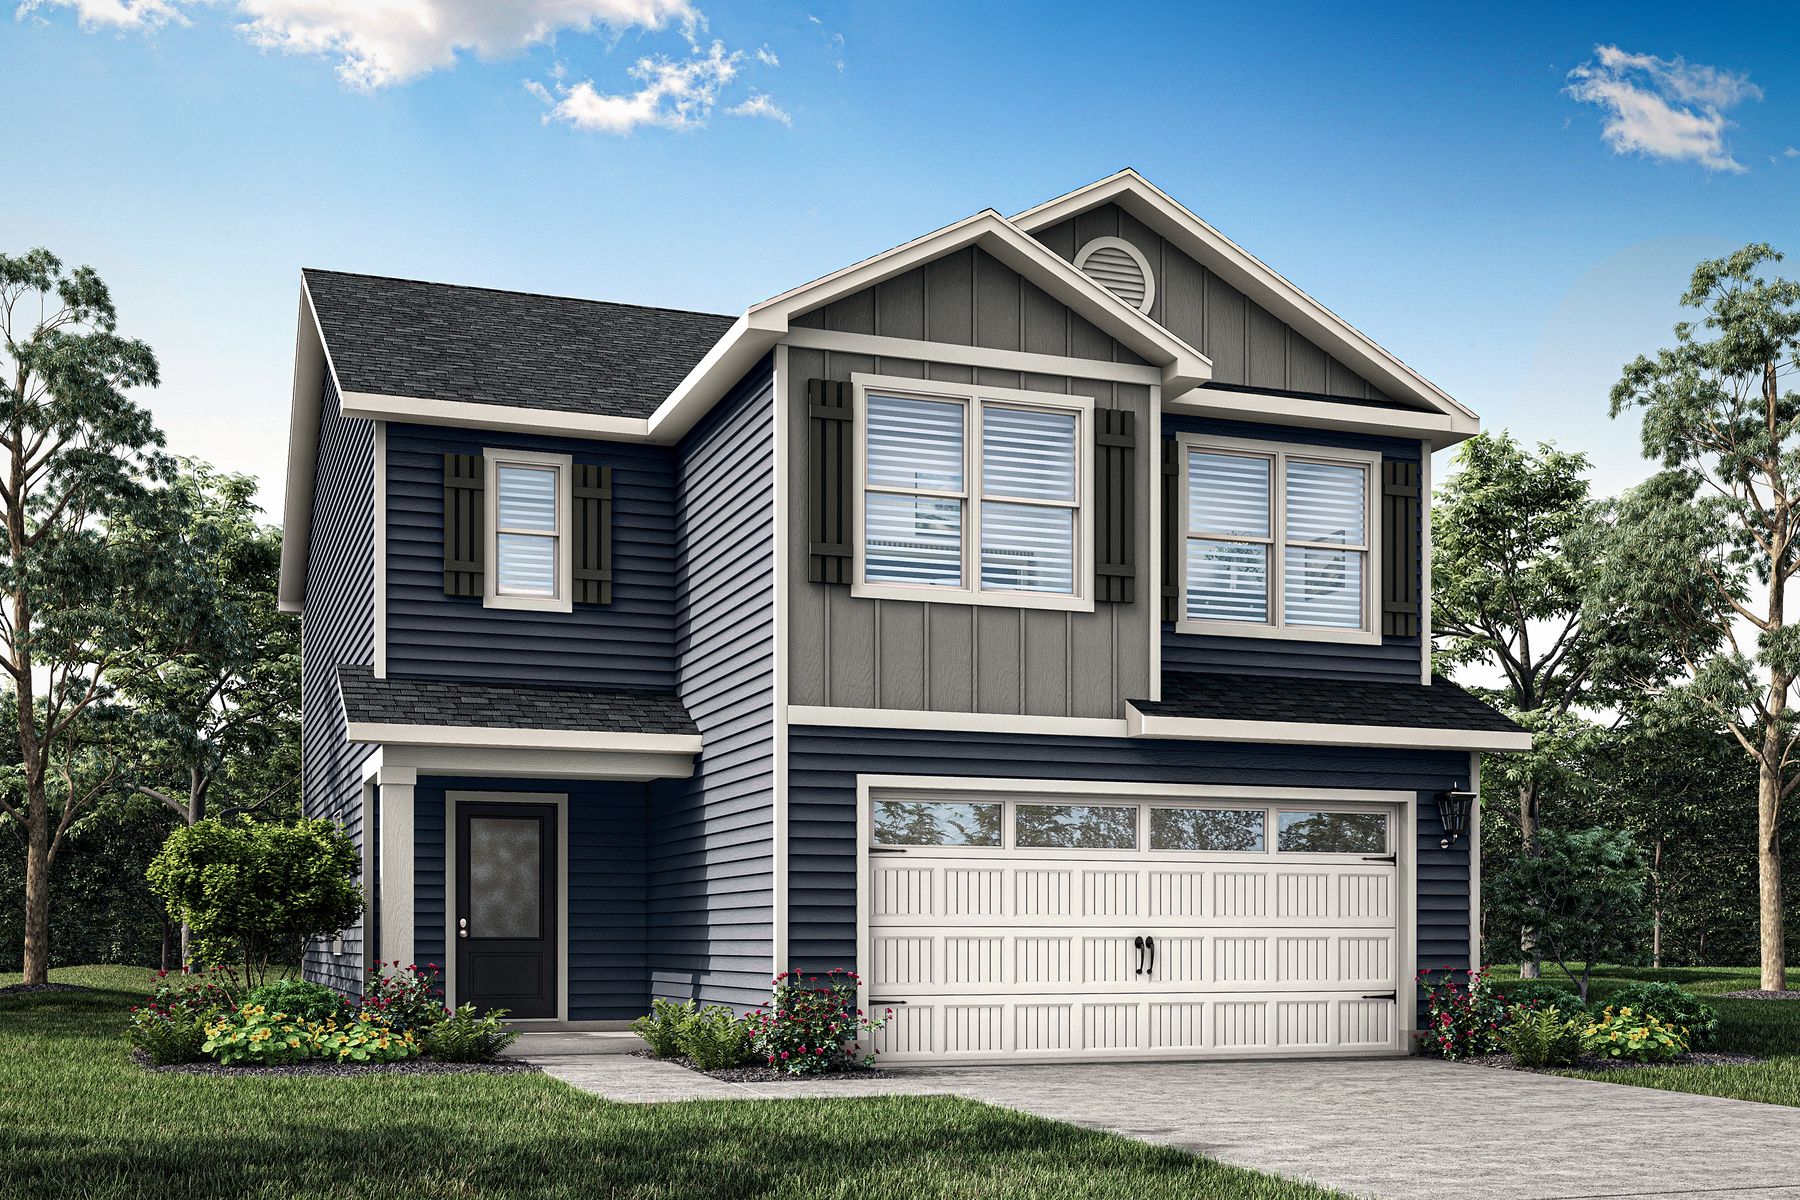 The Burke by LGI Homes:The Burke is a beautiful 3 bedroom home with siding.